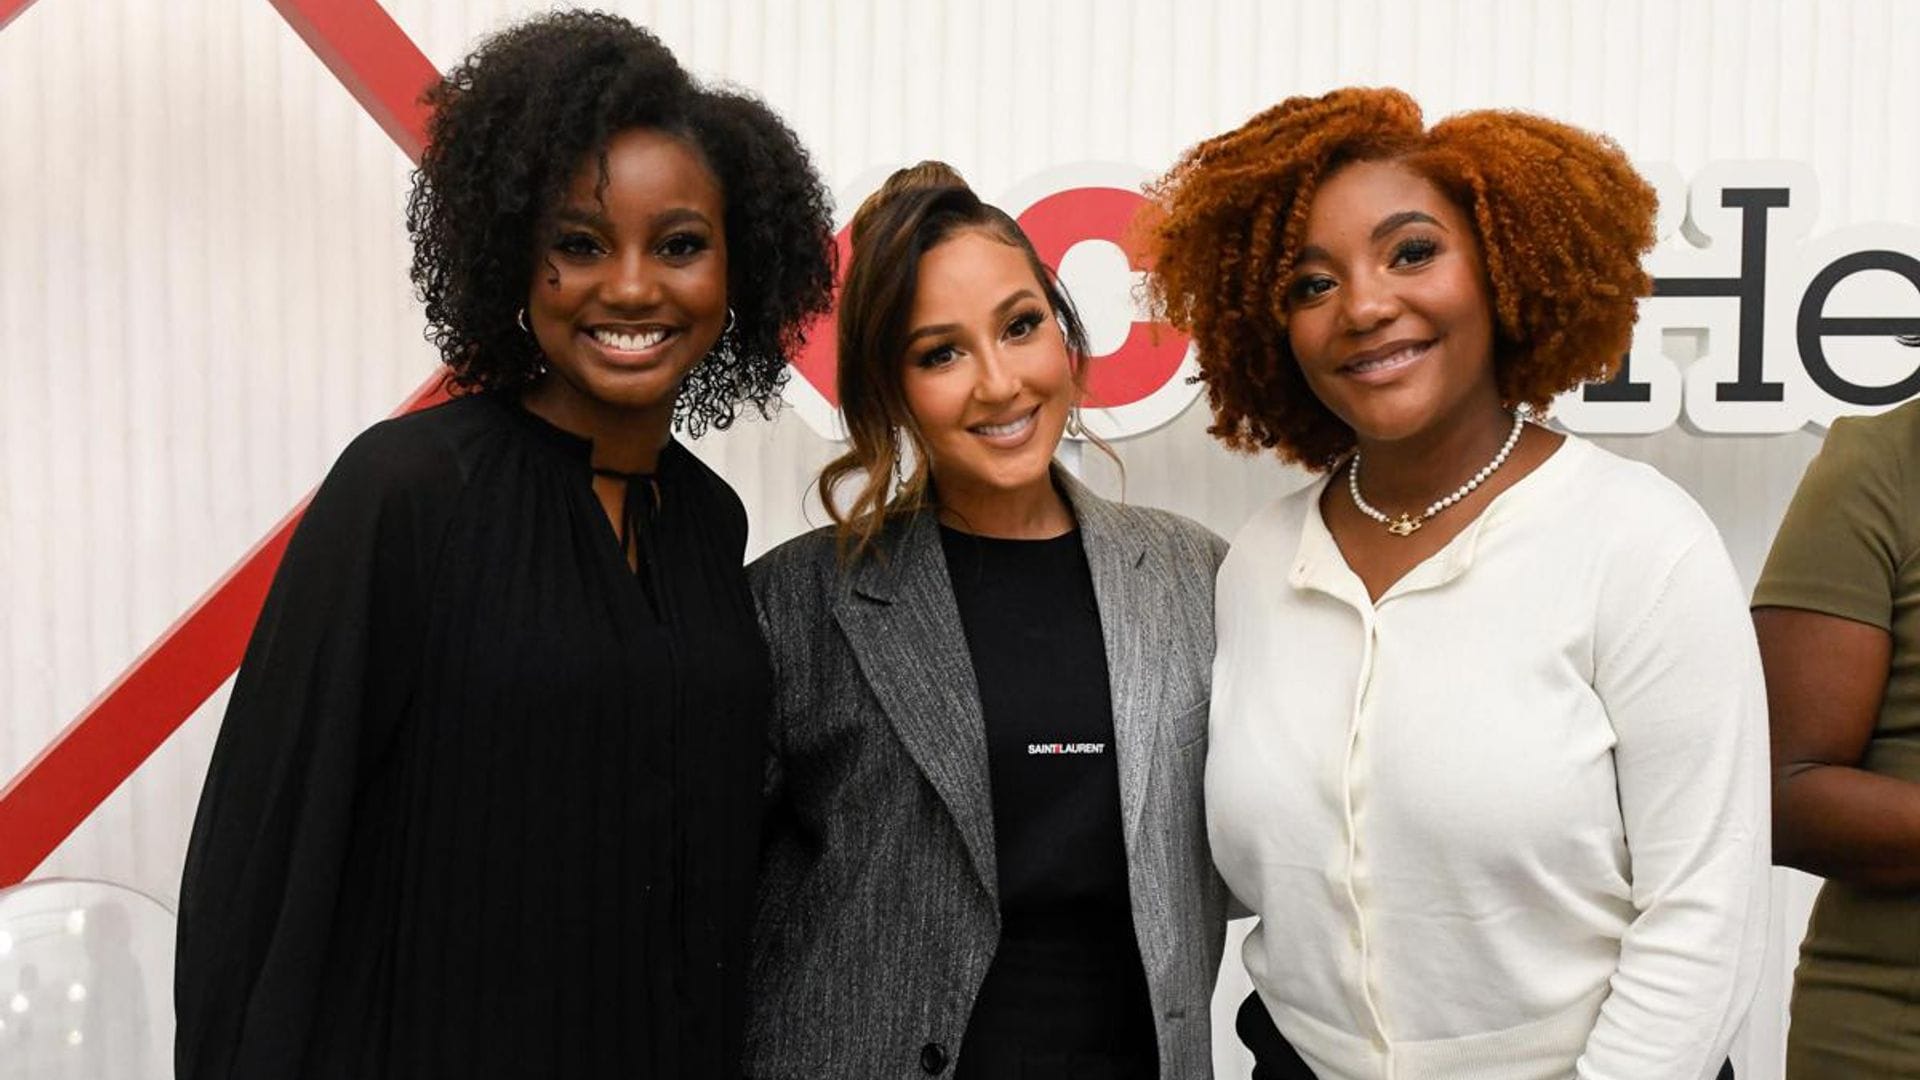 Adrienne Bailon-Houghton discusses how the ‘pink tax’ and period poverty affect our communities